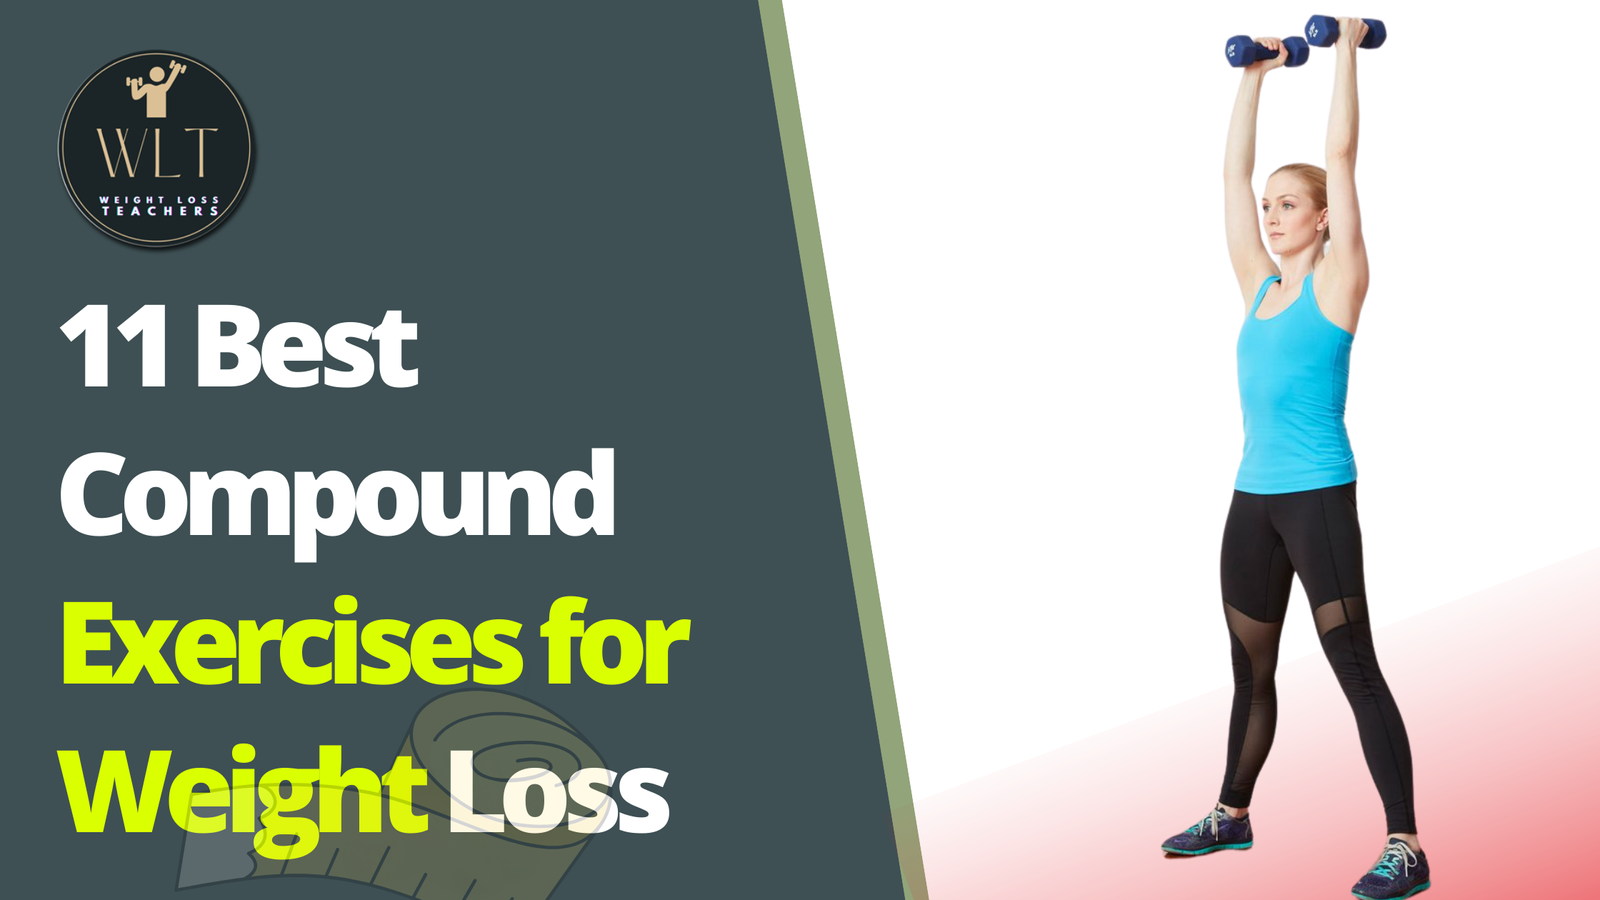 11-best-compound exercises-for-weight-loss